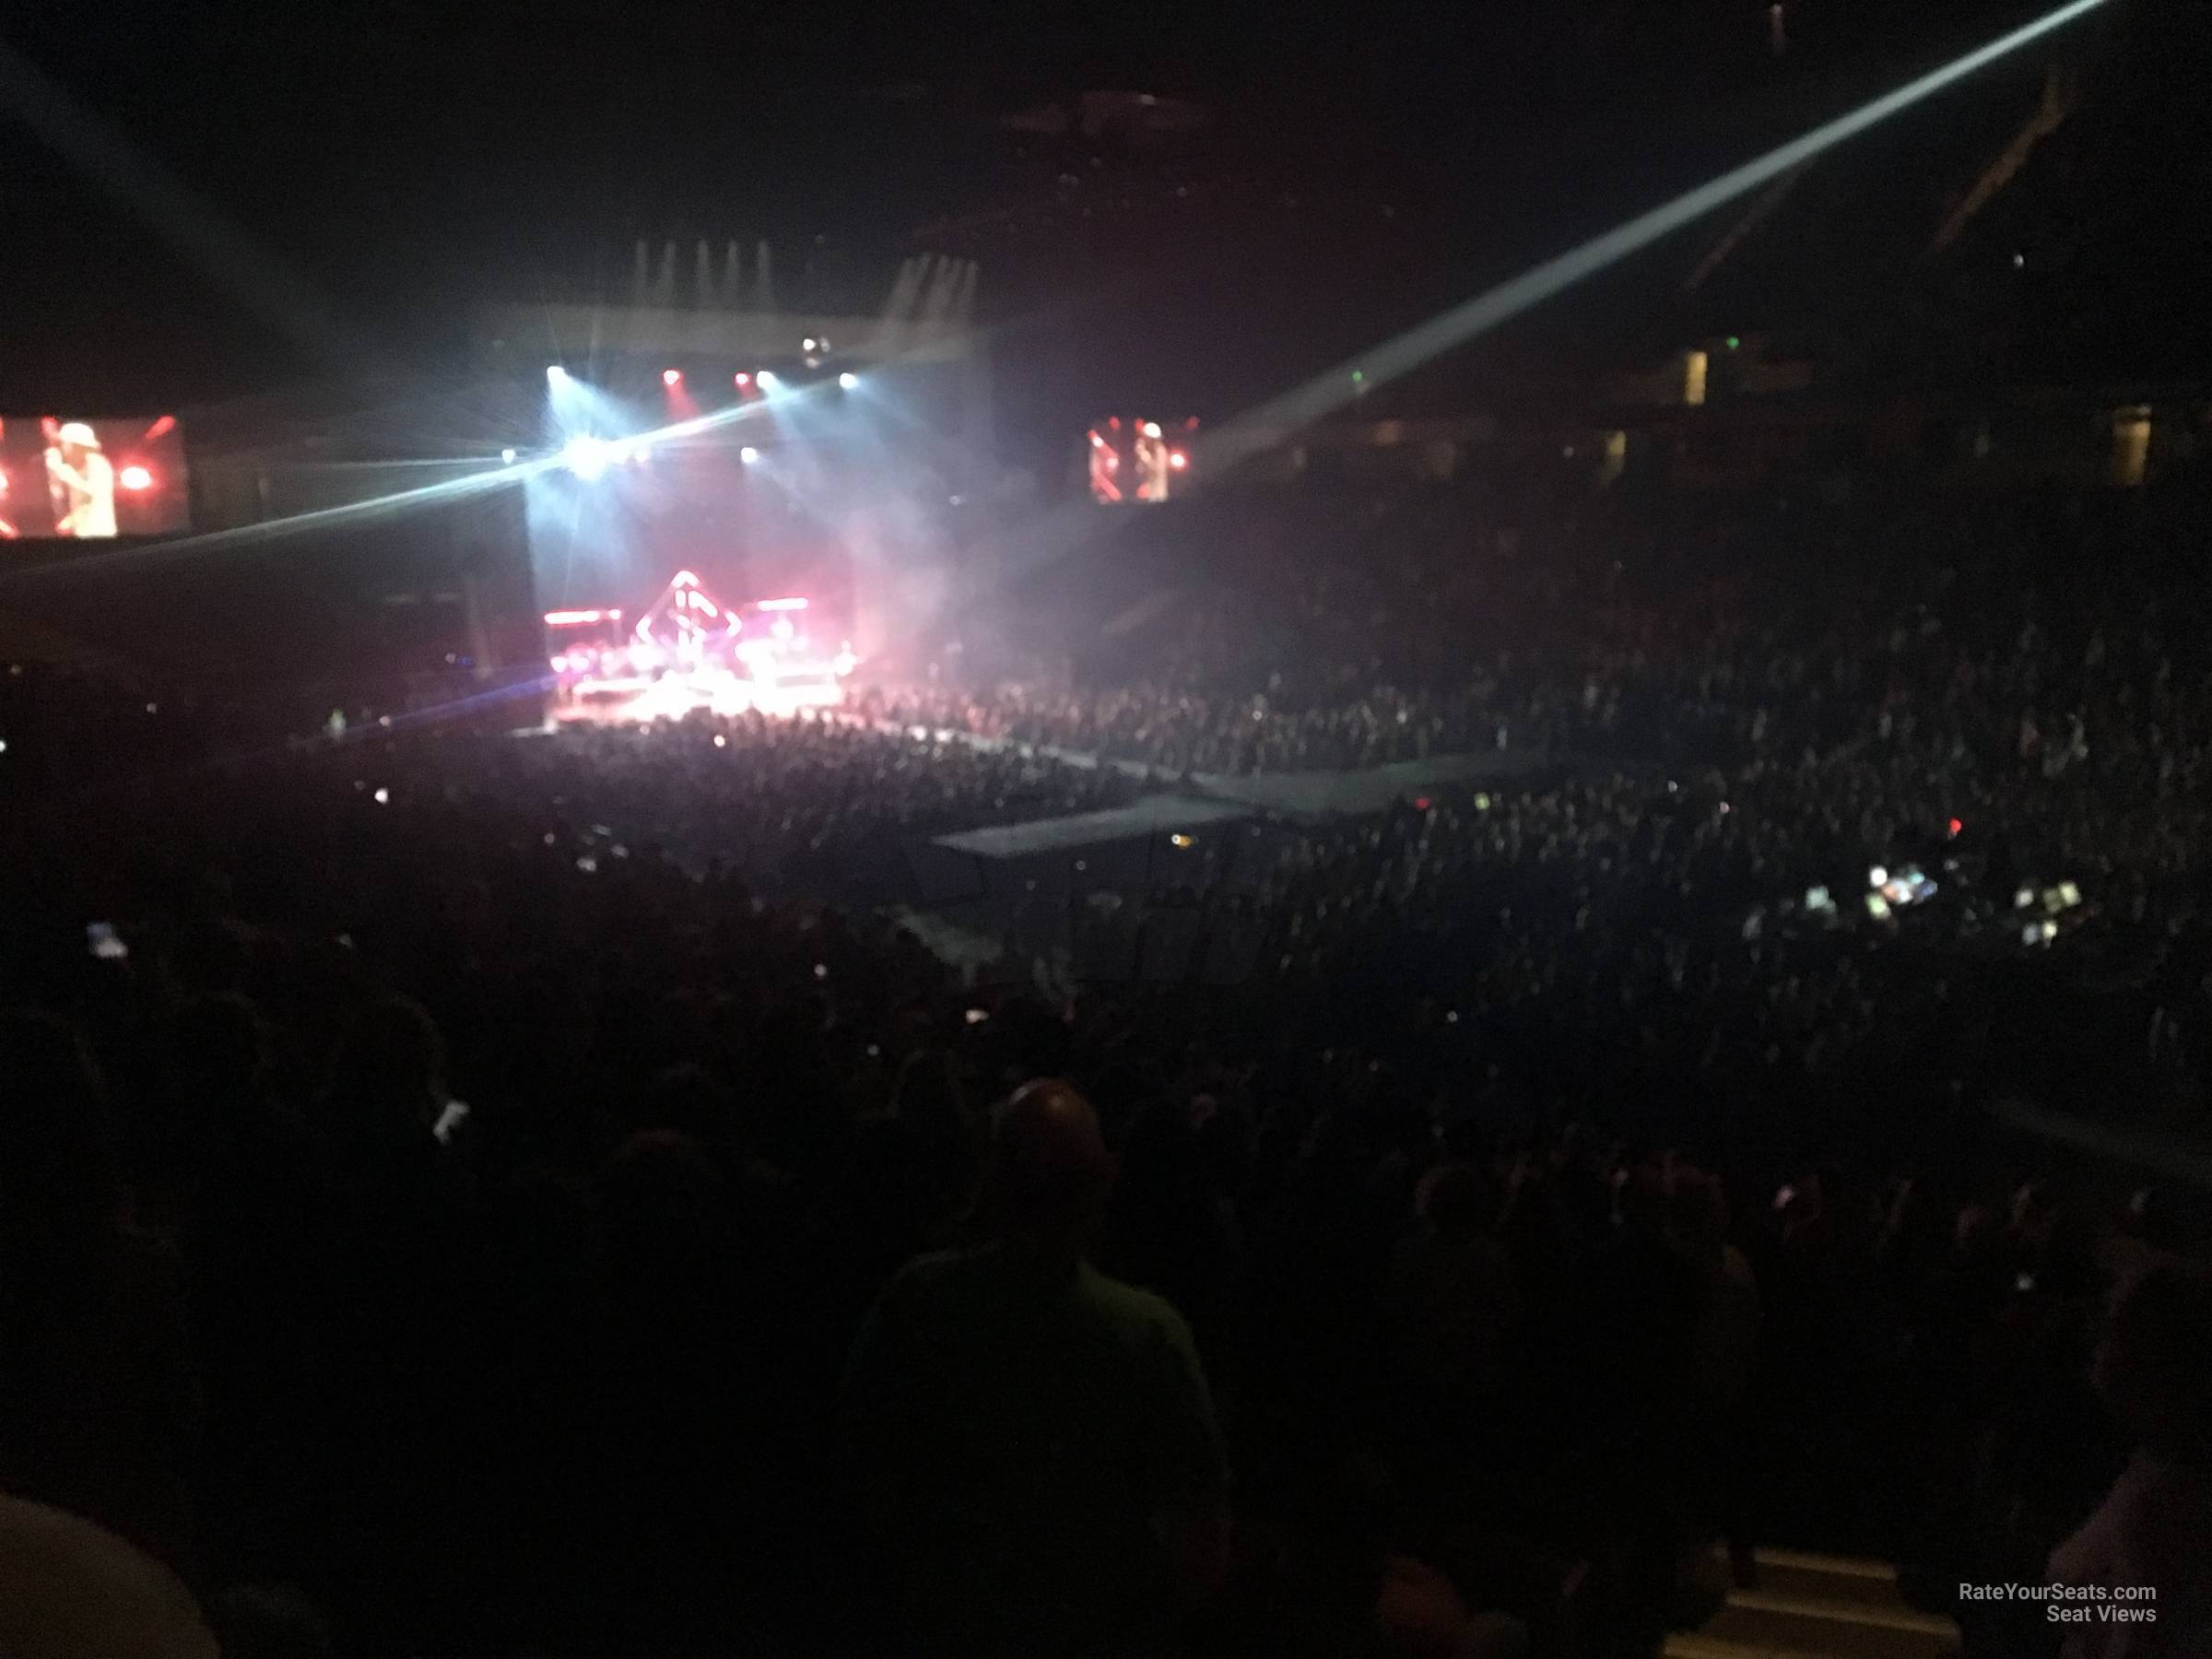 section 125, row x seat view  for concert - legacy arena at the bjcc